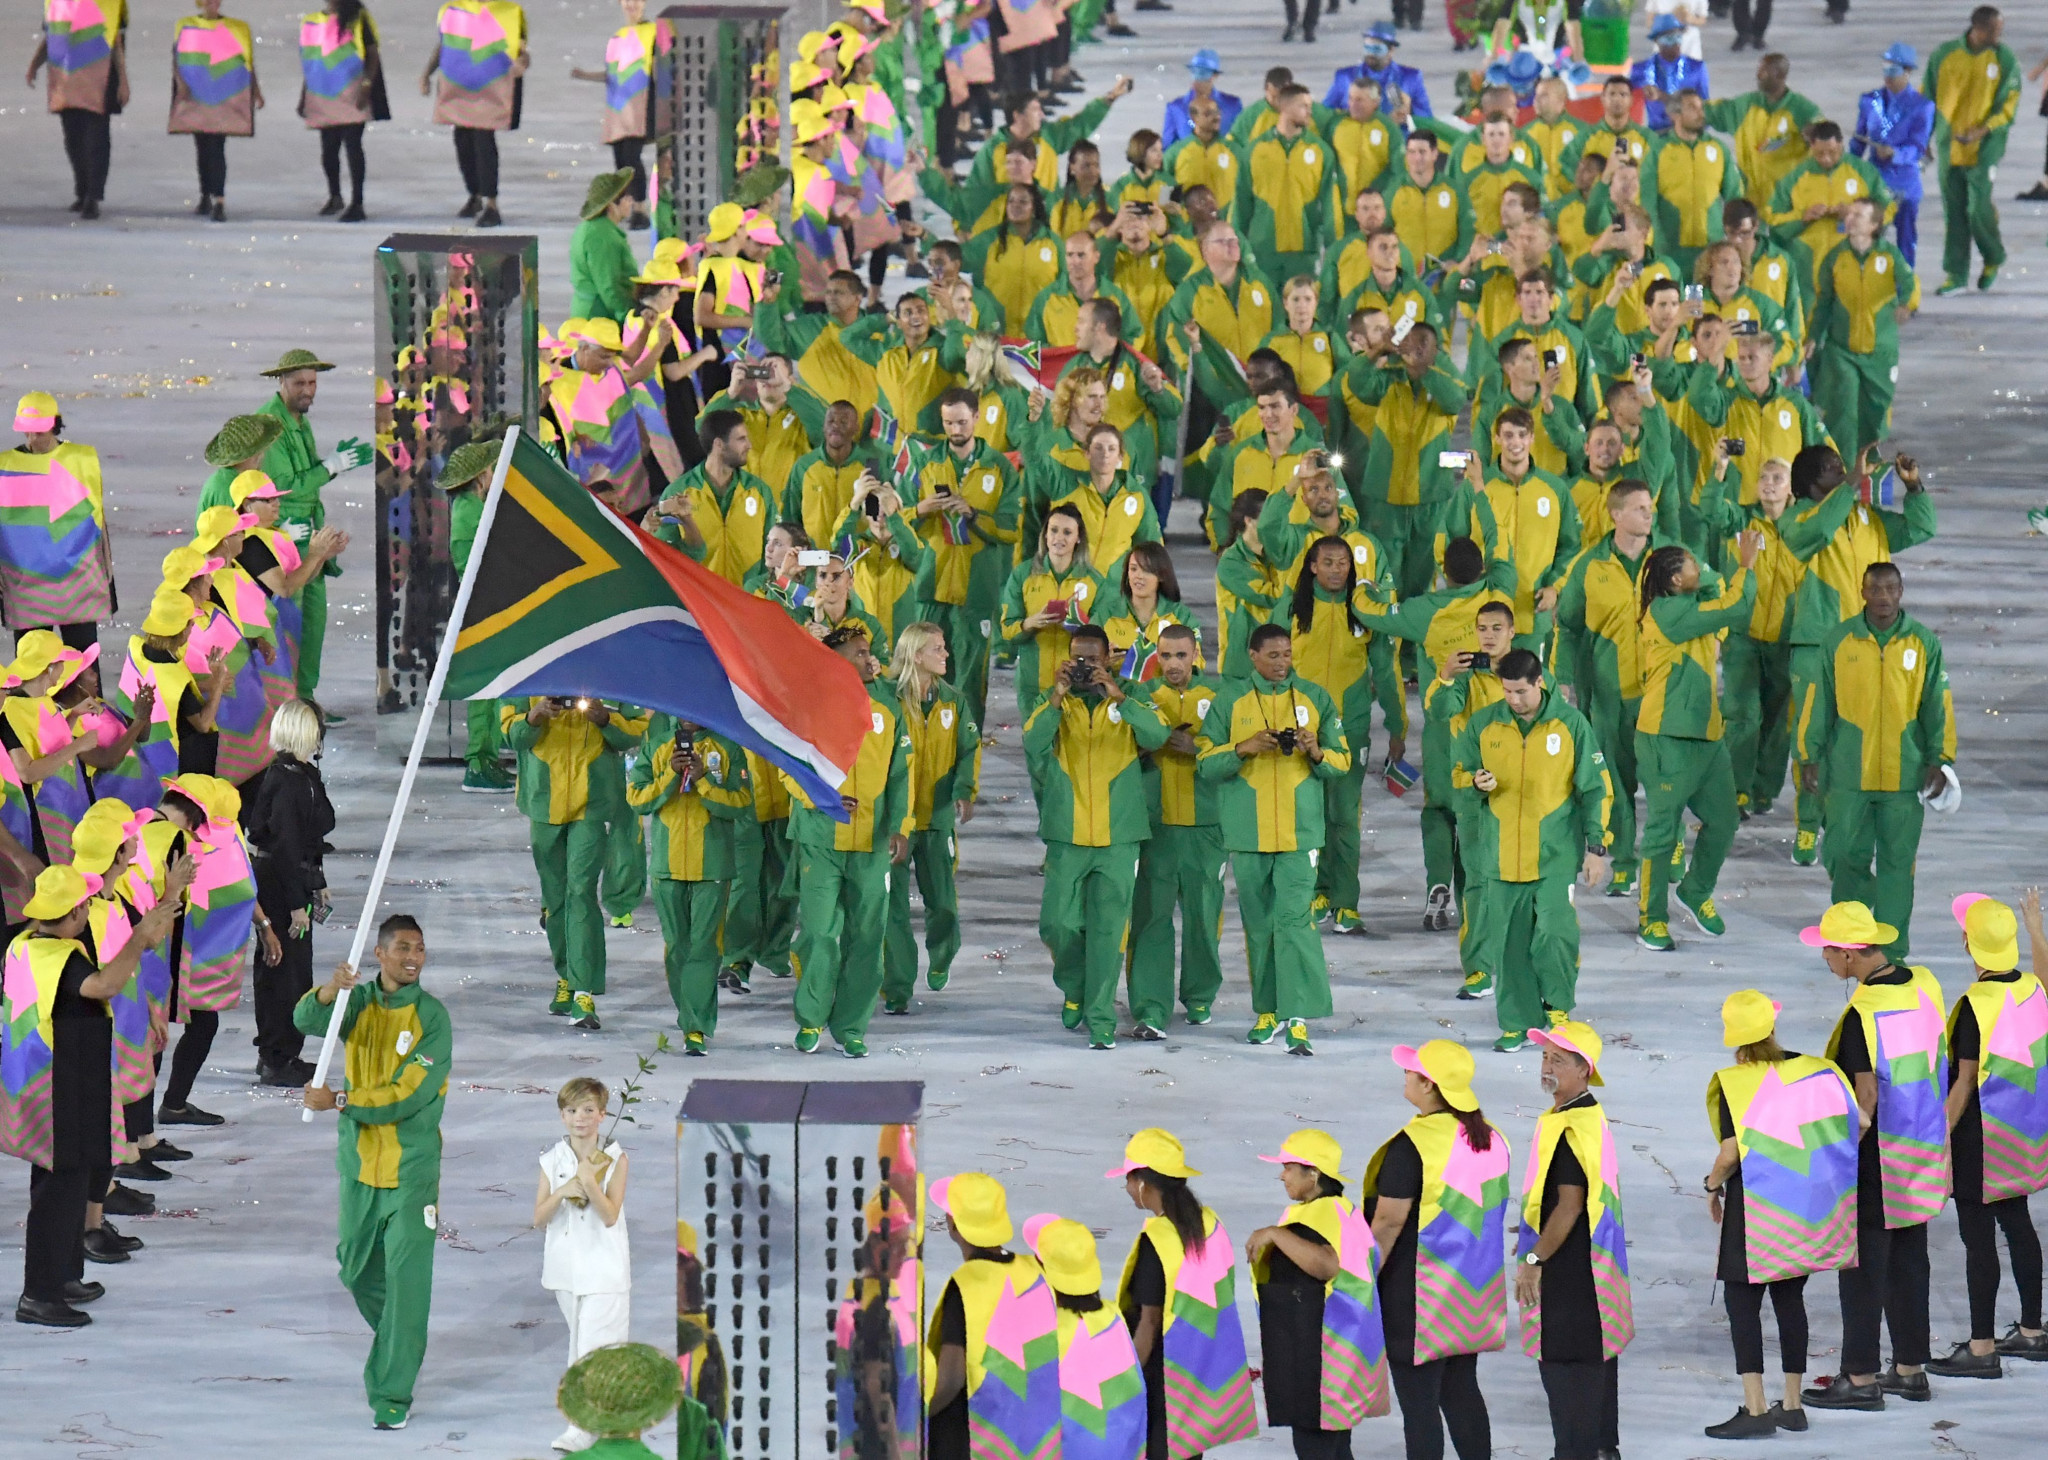 SASCOC struggle to sign Tokyo 2020 selection criteria deals with sports federations